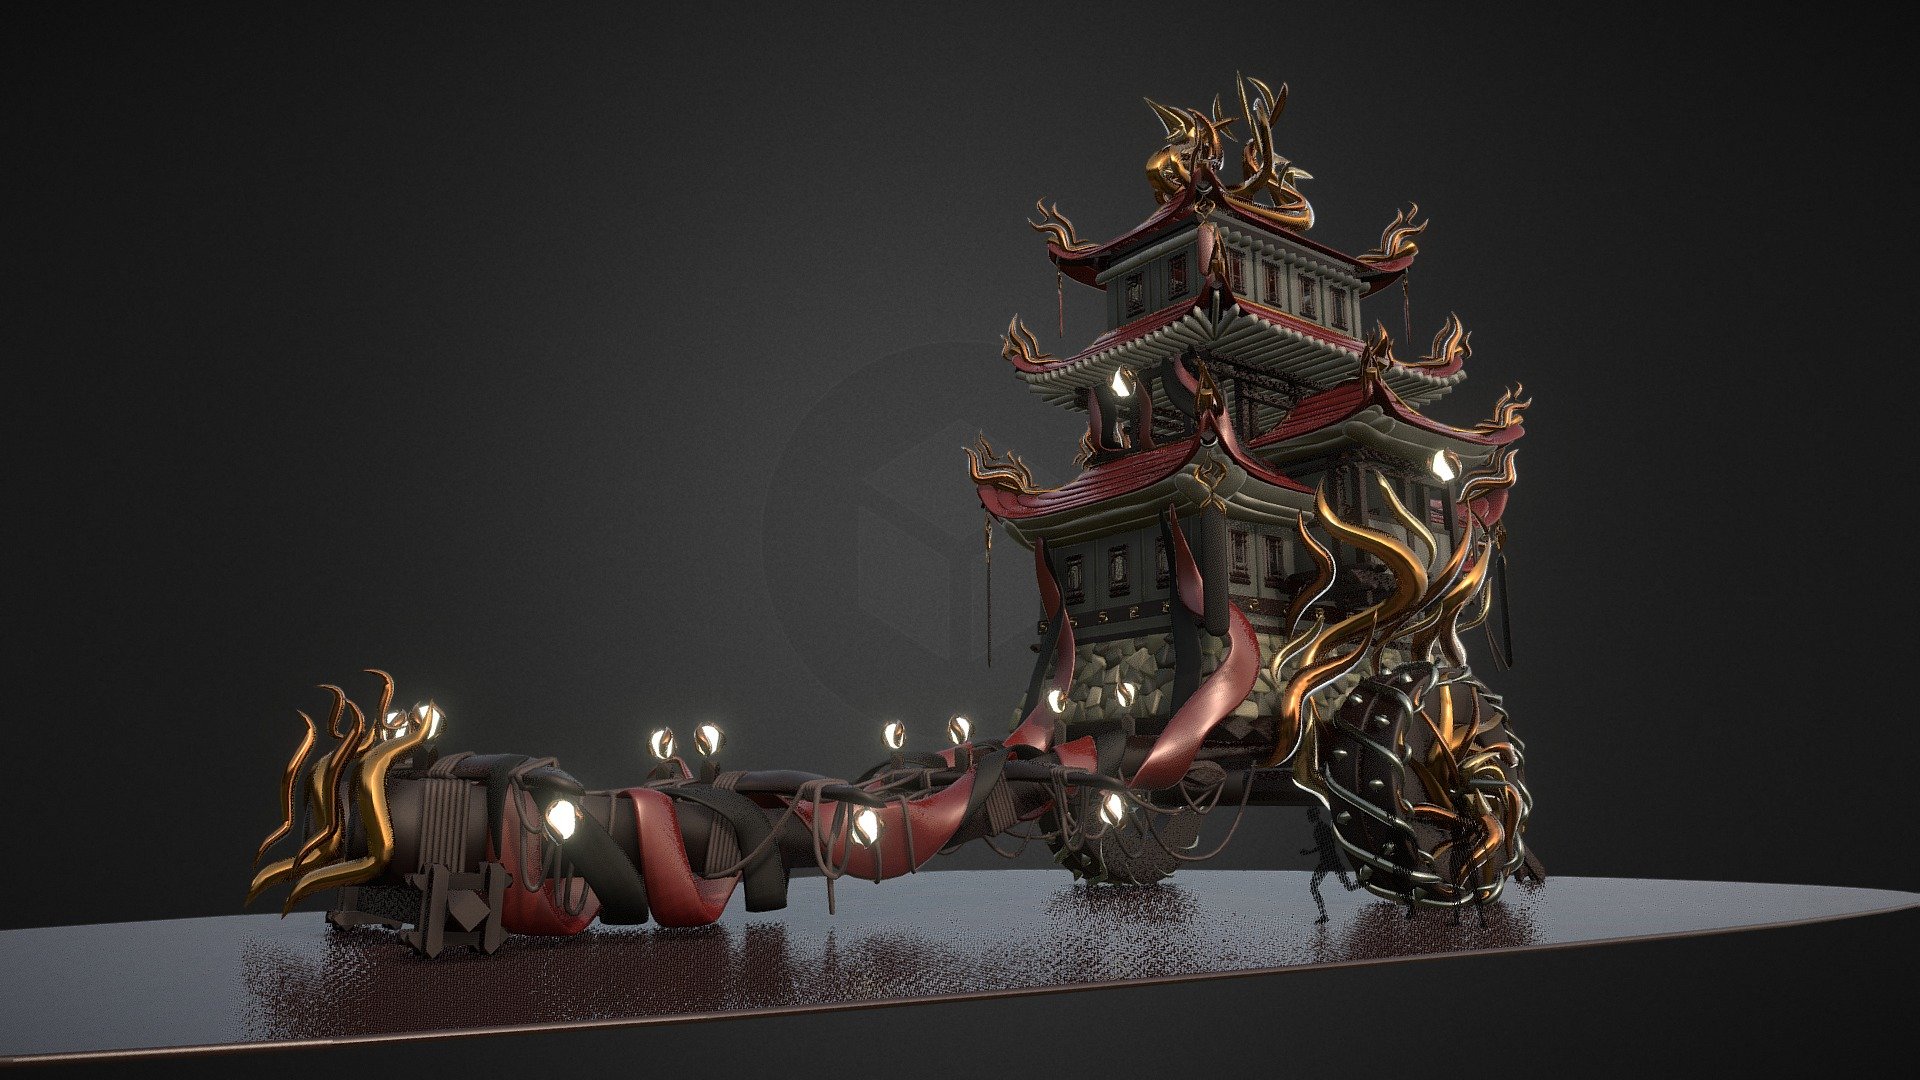 Update | Made it purchasable at the lowest possible price on Sketchfab | *Get the Free Sample to check out the type of file you will get*

Block out model (not prod ready) of prop n°3 for an Artstation Challenge - Gosho Guruma - Great Oxen Cart.
Made entirely in VR using Gravity Sketch and the Oculus Rift. Very quickly cleaned up and prepared in Blender for Sketchfab export.

My entry for the contest if you are interested in the full story https://www.artstation.com/contests/feudal-japan/challenges/57/submissions/33139?sorting=survivors

This immense cart belongs to Lady Nō of the Oda clan. She has been burned badly by her late husband and former Daimyo Oda Nobunaga and decided to take her revenge, kill him and take his place as leader. Her mobile outpost reflects her alignment with the Yokai spirit Katawaguruma - A cart wheel on fire with a burned woman coming out from behind the flames. It inspire fear on whomever lay eyes on the cart 3d model